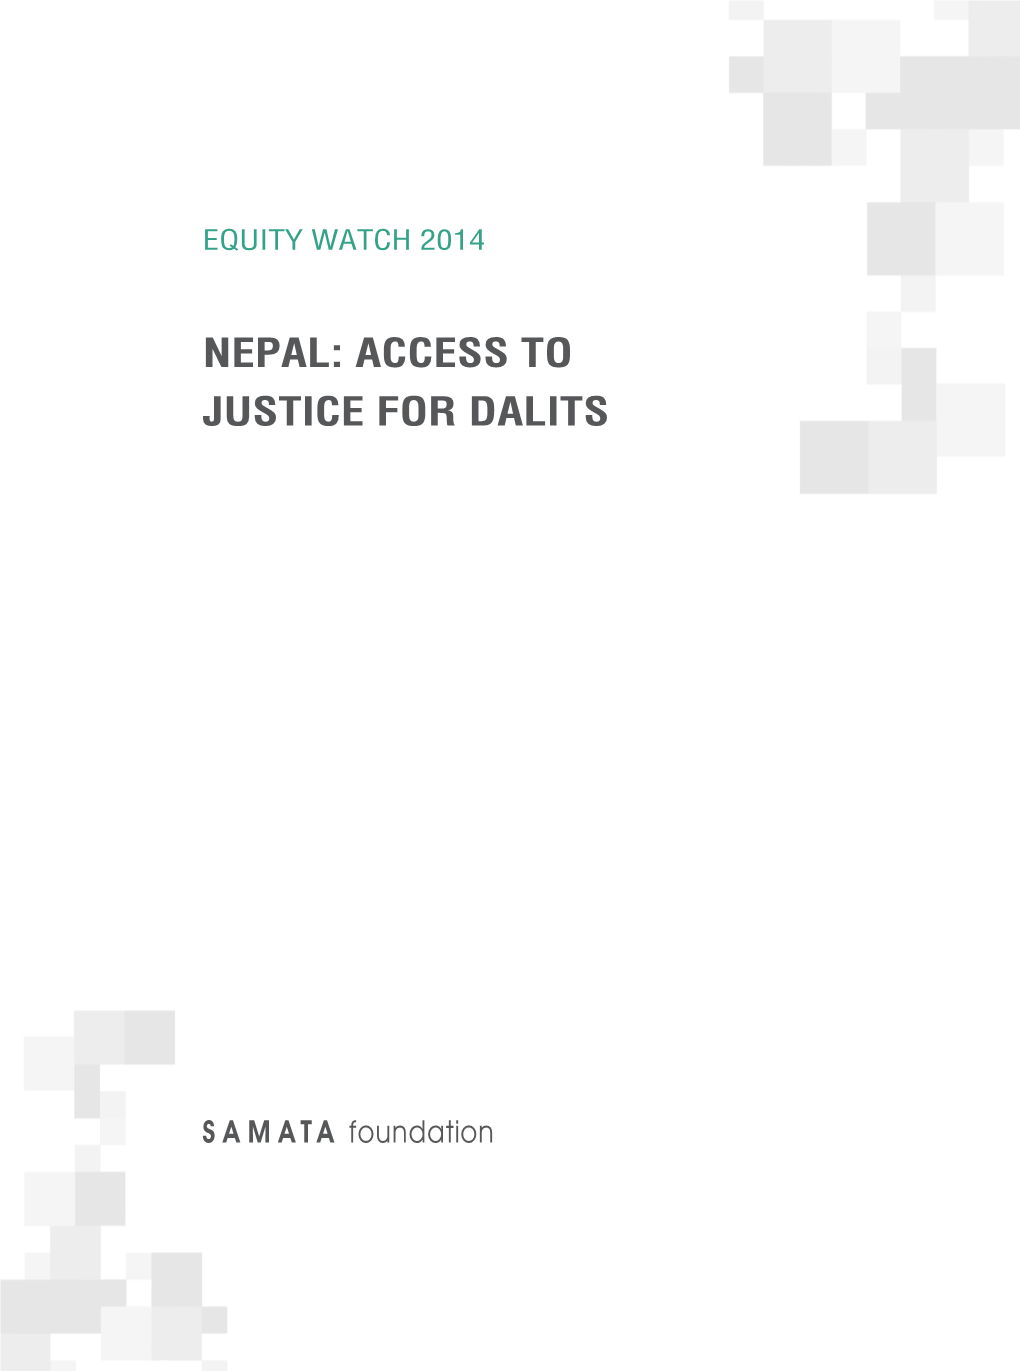 Nepal: Access to Justice for Dalits